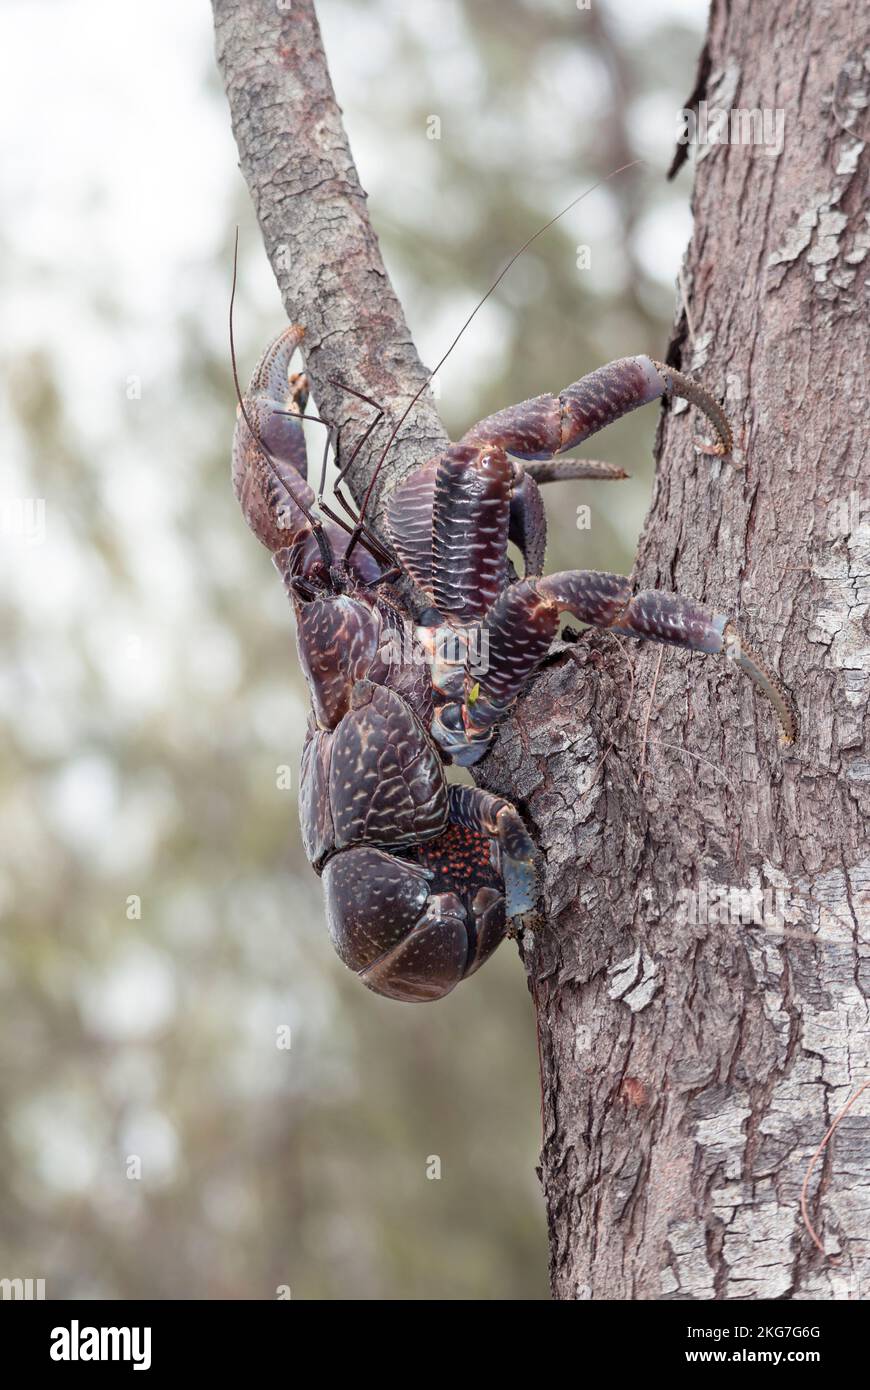 A juvenile male Robber, or Coconut Crab. They are the largest member of the Hermit Crab family and have become independent of their marine background. Stock Photo